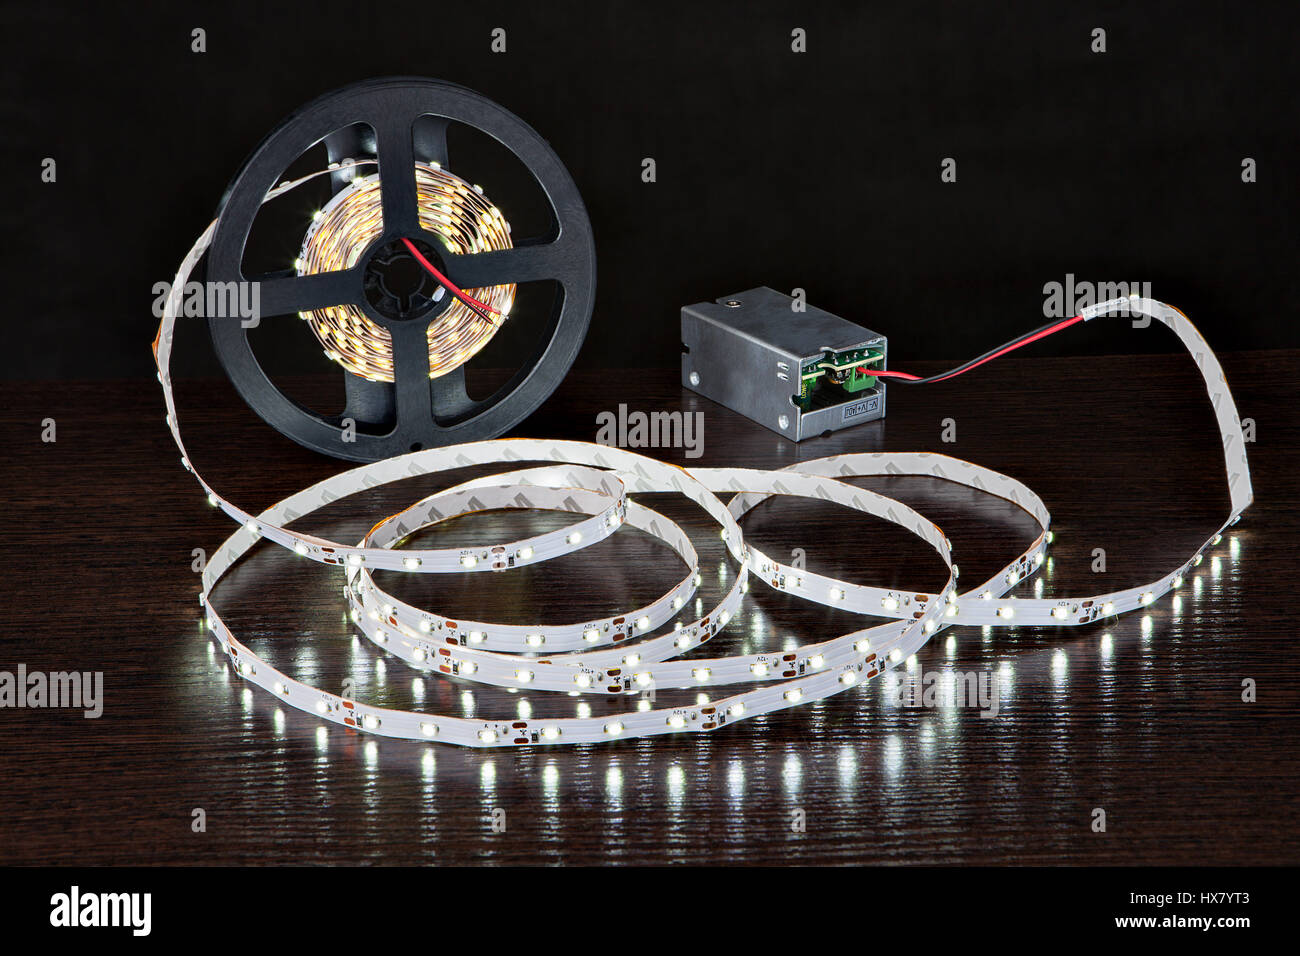 Spool of luminous LED strip light connected to Power Supply Adapter Driver  Stock Photo - Alamy